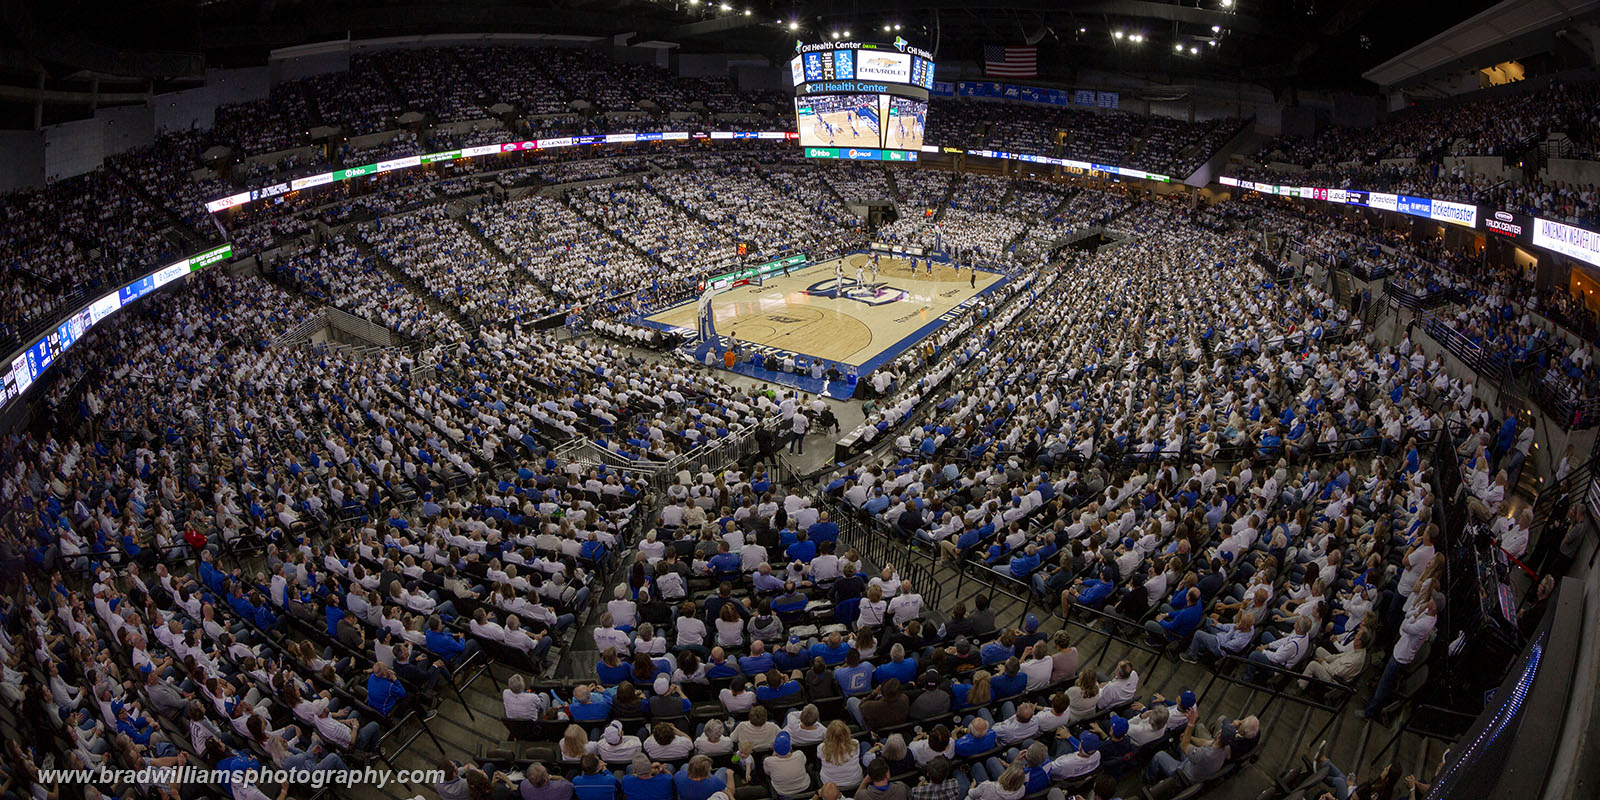 2020 Creighton VS Seton Hall 3/7/2020. Attendance = 18,519.  As of 3/7/2020 this was the 10th largest home crowd in Creighton...